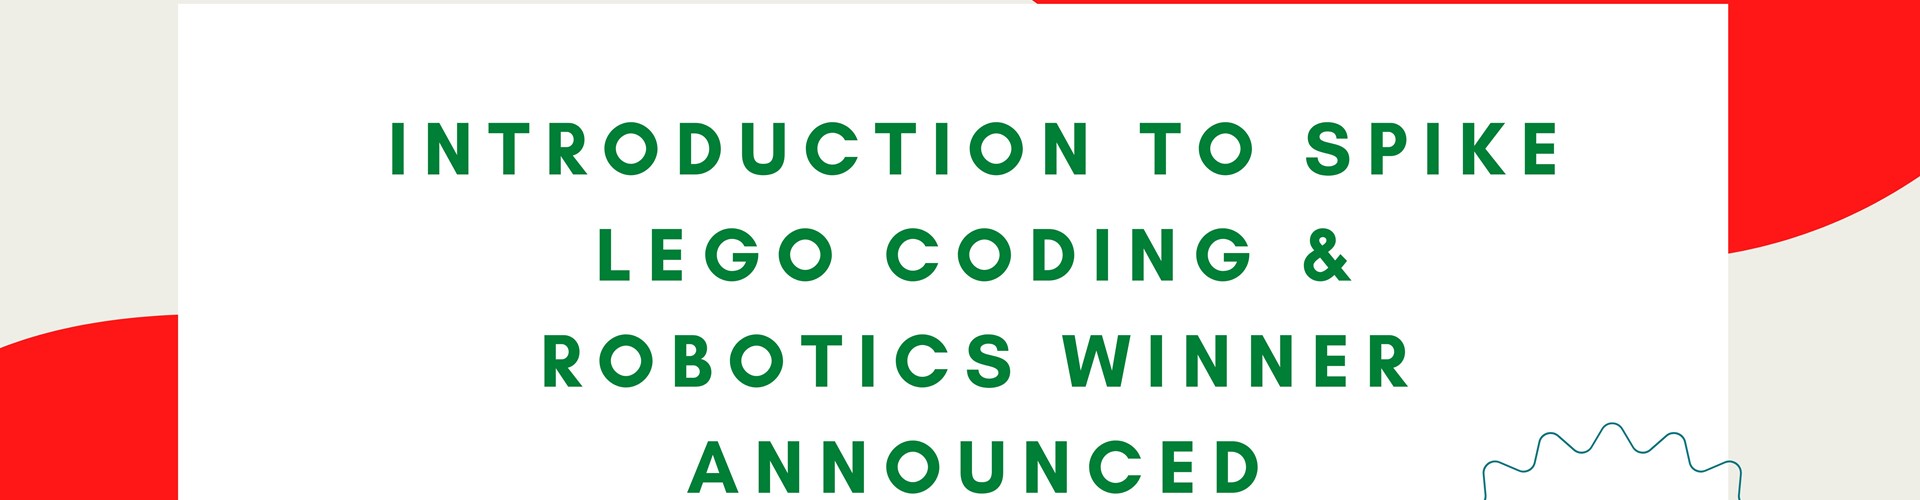 Introduction to SPIKE LEGO Coding & Robotics winner announced!